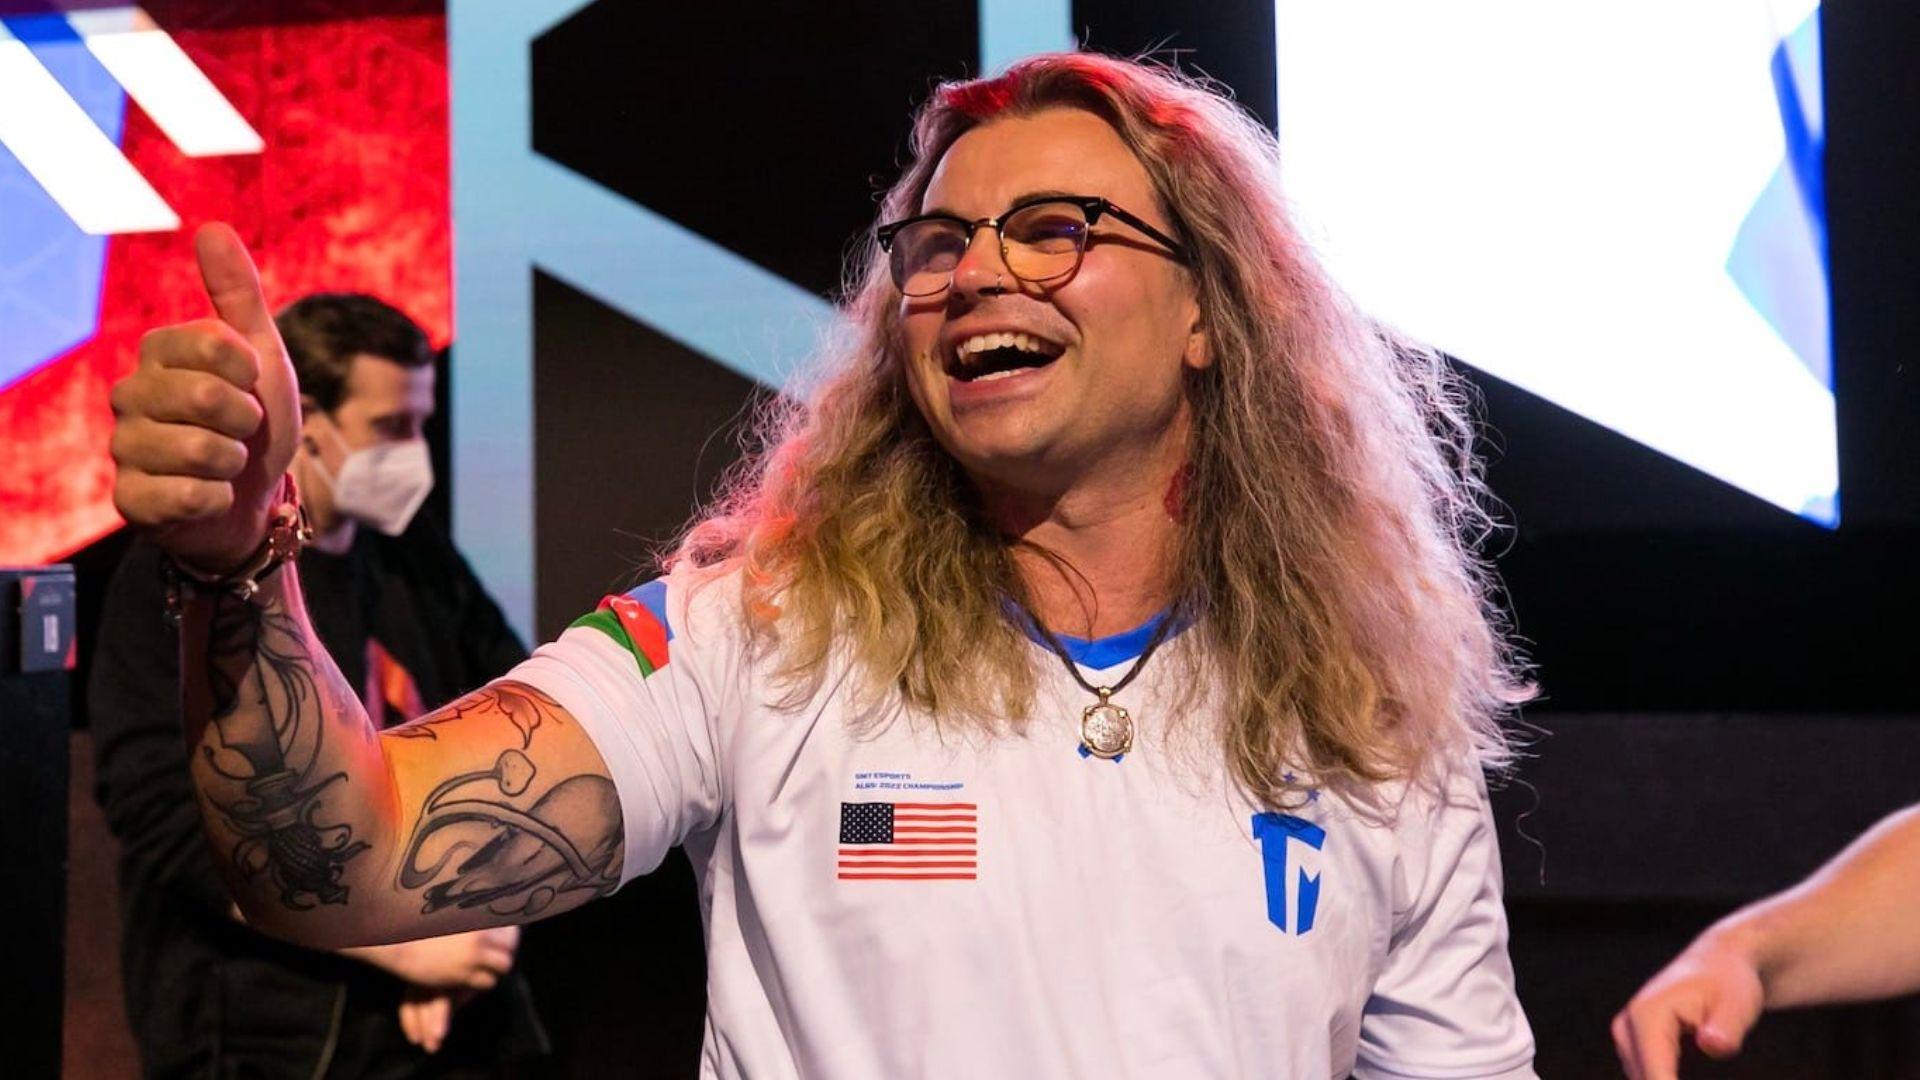 Rambeau doing a thumbs up in The Guard jersey at Apex Legends event